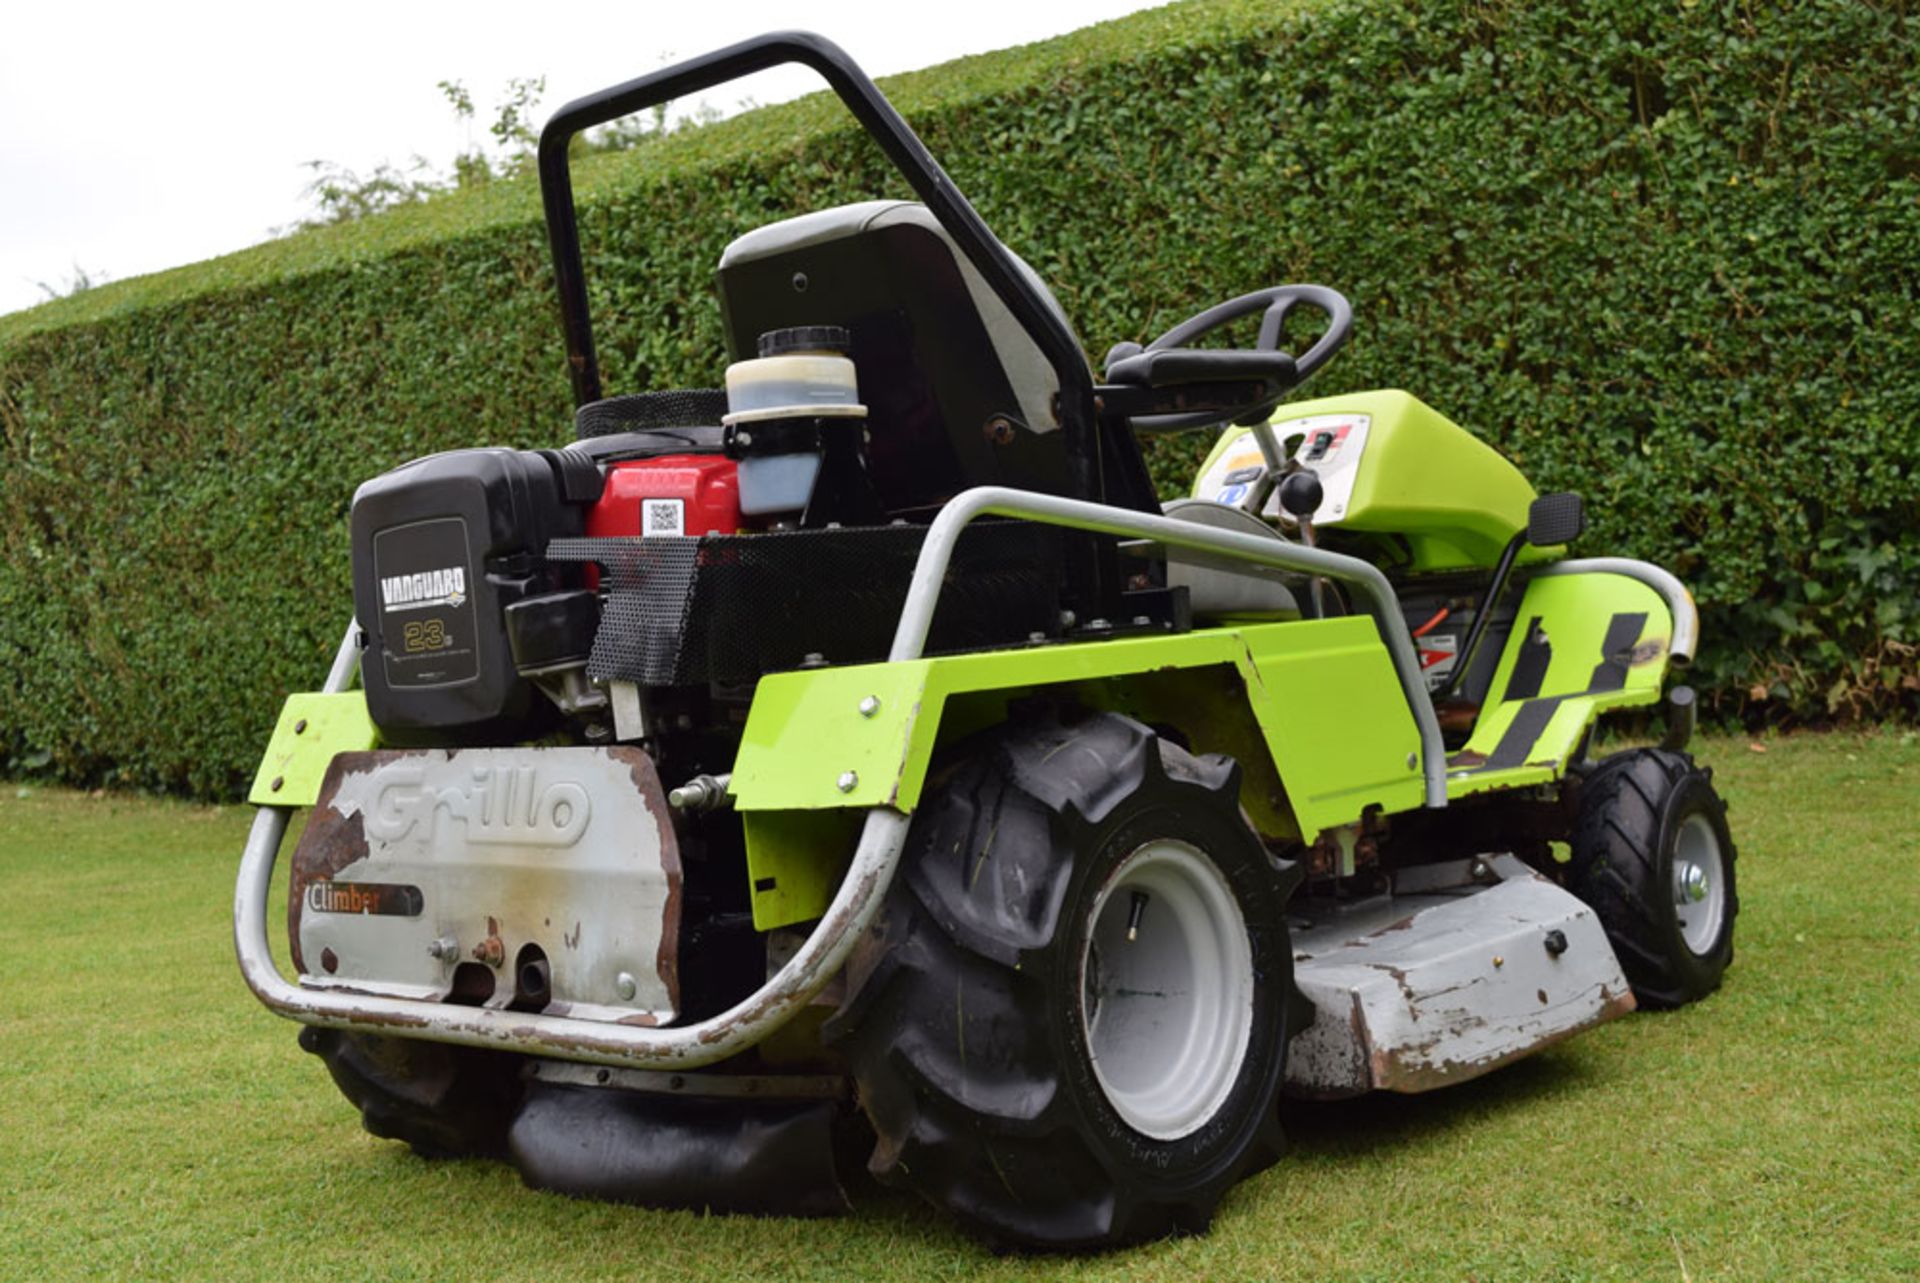 2011 Grillo Climber 9.21 Ride On Rotary Mower - Image 9 of 11